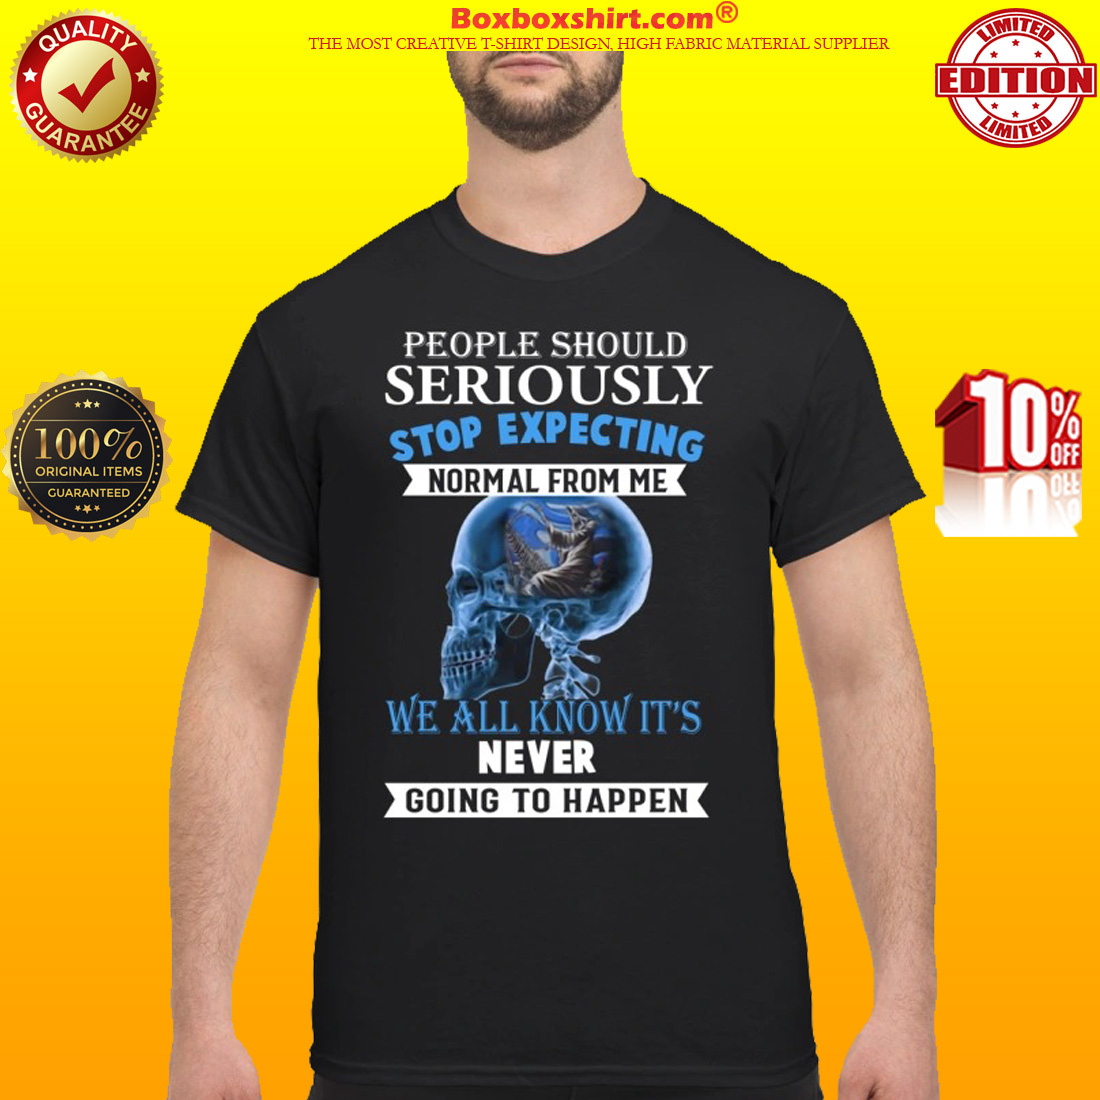 People should seriously stop expecting normal from me shirt